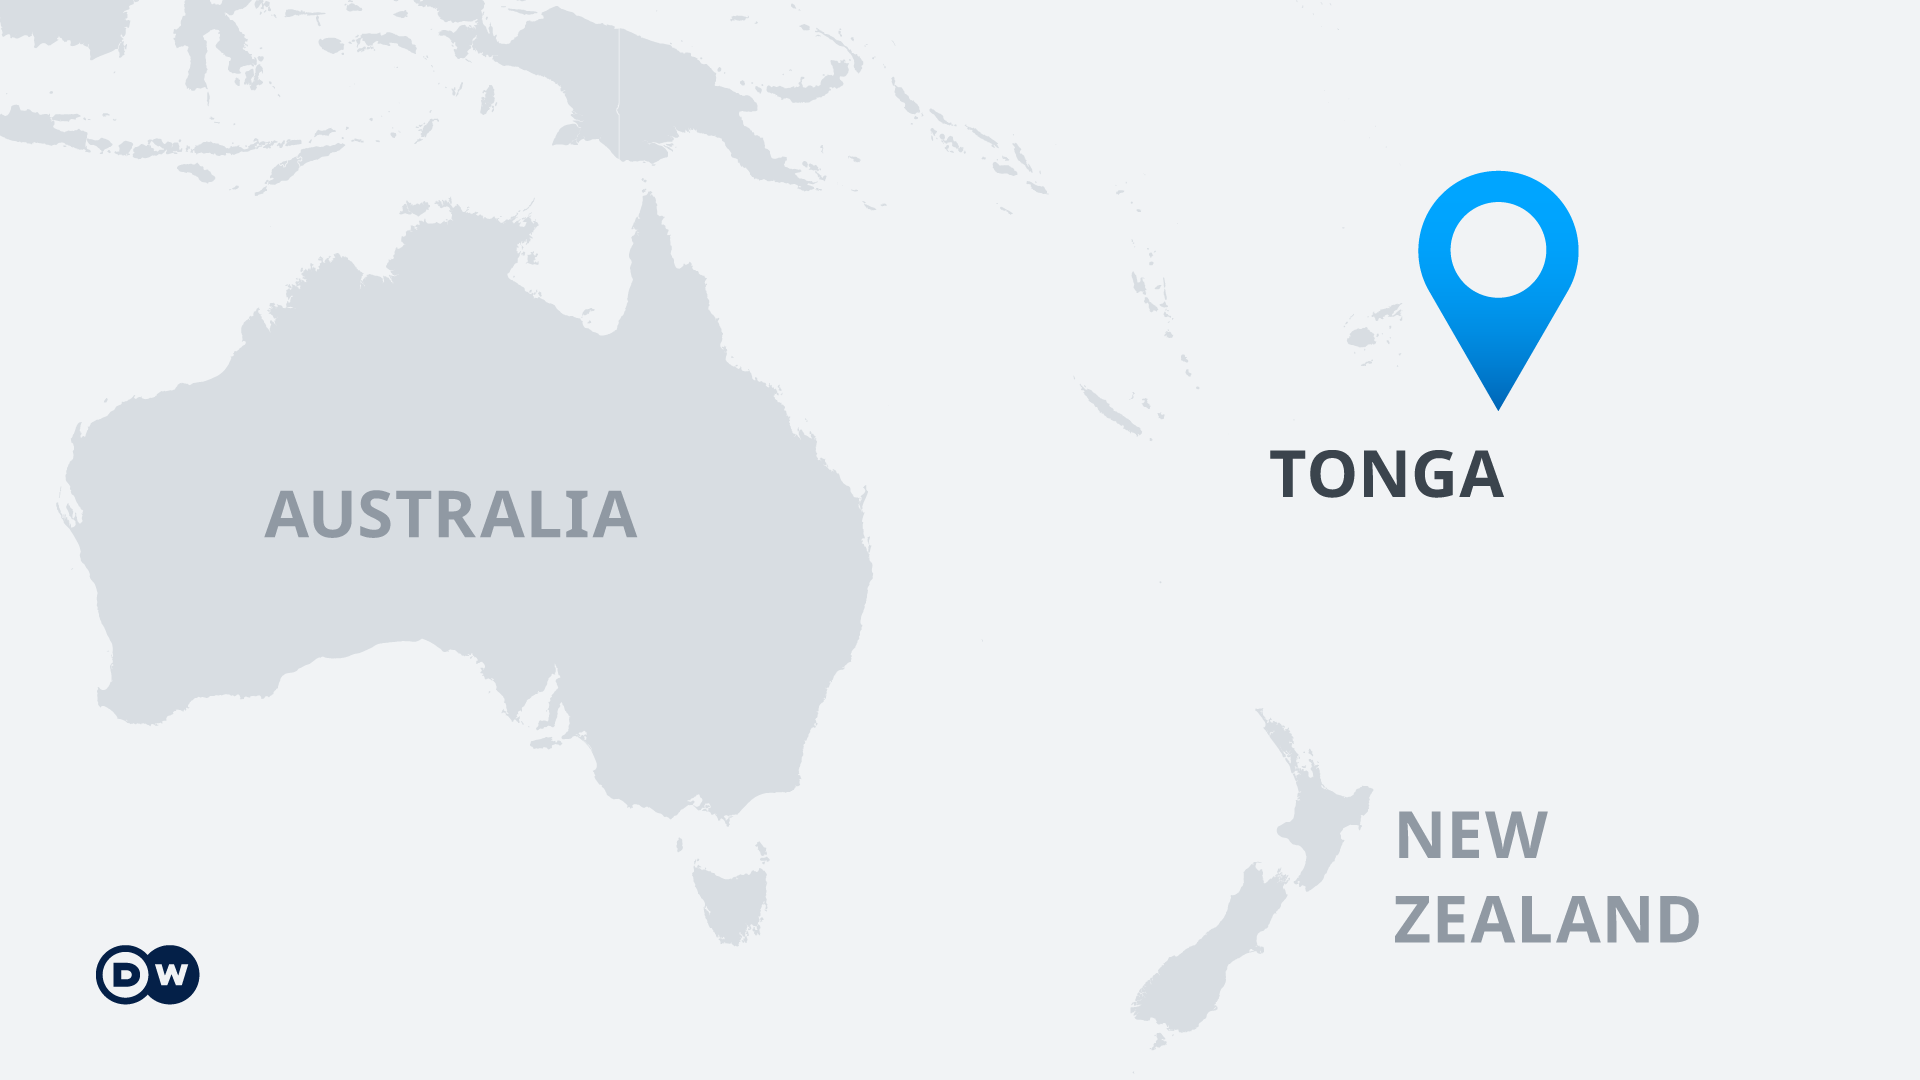 A map showing the location of the island of Tonga